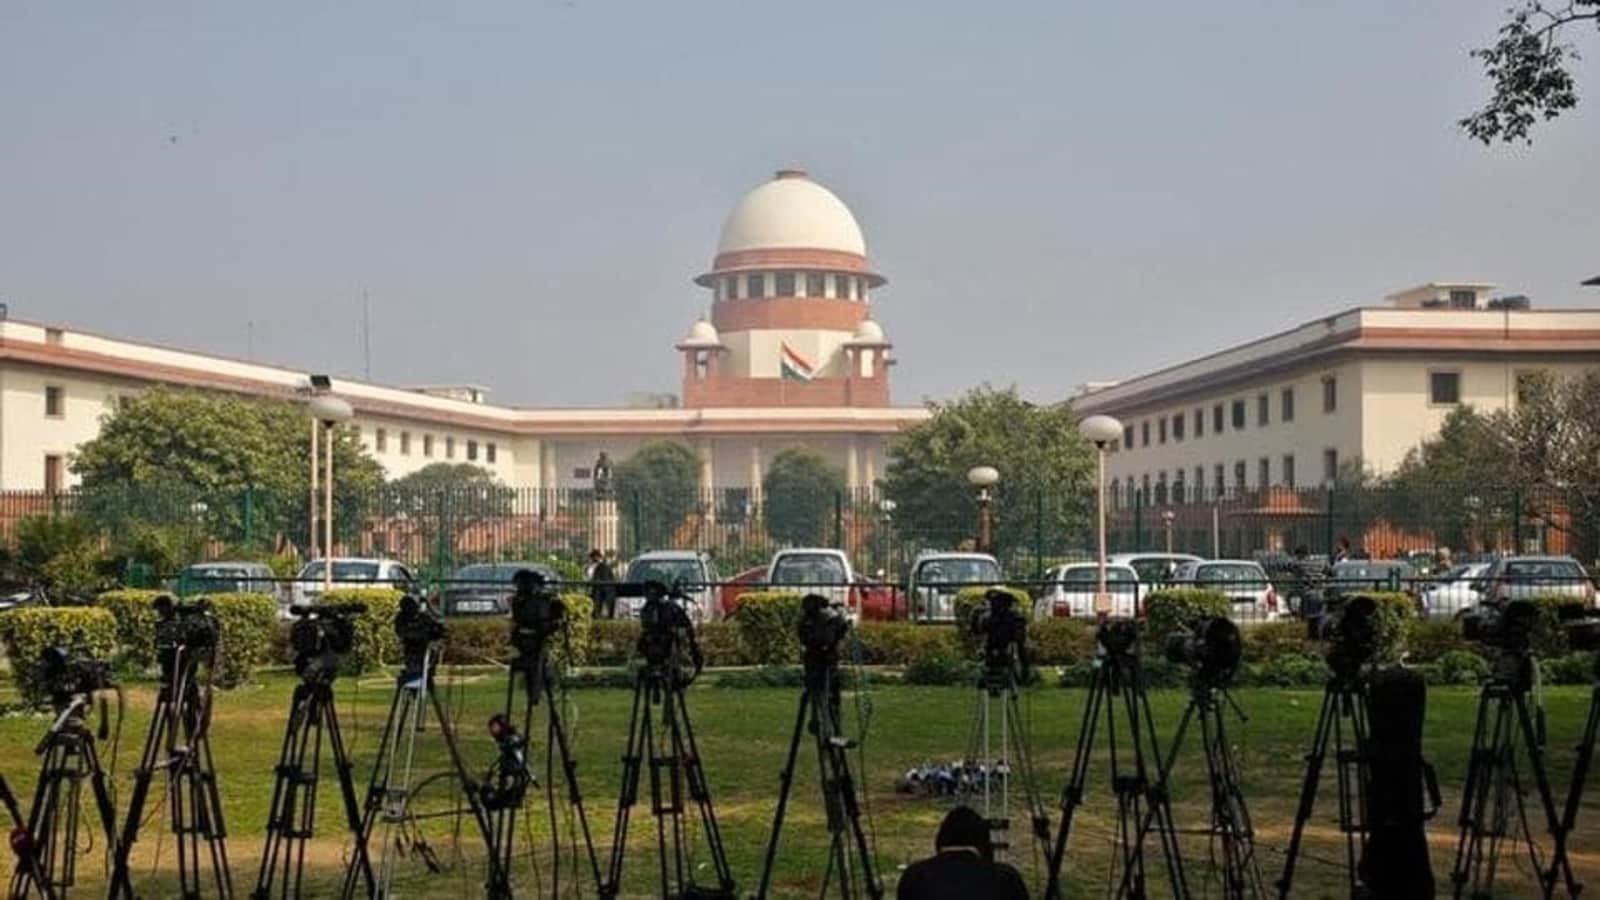 SC Notice of Guidance on Requests for Complaints Against Search and Seizure of Digital Devices